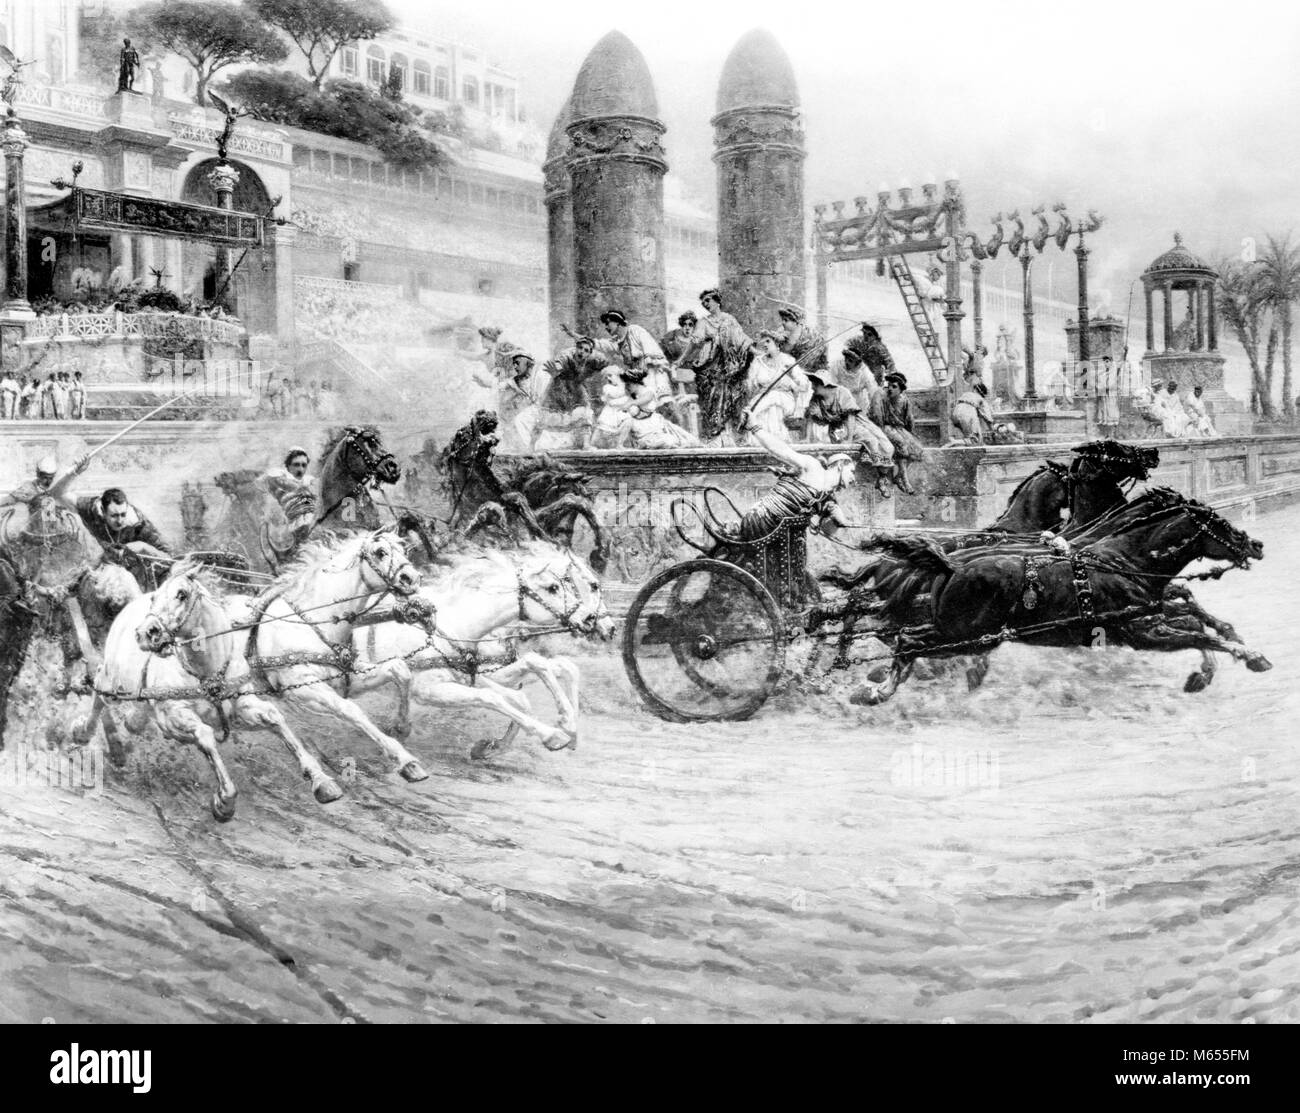 ILLUSTRATION CHARIOT RACE IN CIRCUS MAXIMUS ANCIENT ROME - a6007 SPL001 HARS LEADING ROMAN HISTORIC SUCCESS ACTIVITY ANCIENT PERSONALITY MAMMALS ADVENTURE STRENGTH STRATEGY CONTEST EXCITEMENT NOBODY POWERFUL PRIDE COMPETING CAPITAL CONCEPT WINNERS ARTS MAXIMUS SUCCEED WHIP WHIPPING SMALL GROUP OF ANIMALS ACTIONS EQUINE COMPETITOR COMPETITORS MAMMAL B&W BLACK AND WHITE CAPITAL CITY CHARIOT CHARIOTS CIRCUS MAXIMUS COMPETE OLD FASHIONED PERSONALITIES PERSONS ROMAN EMPIRE ROME SPECTACLE WHIPPED Stock Photo